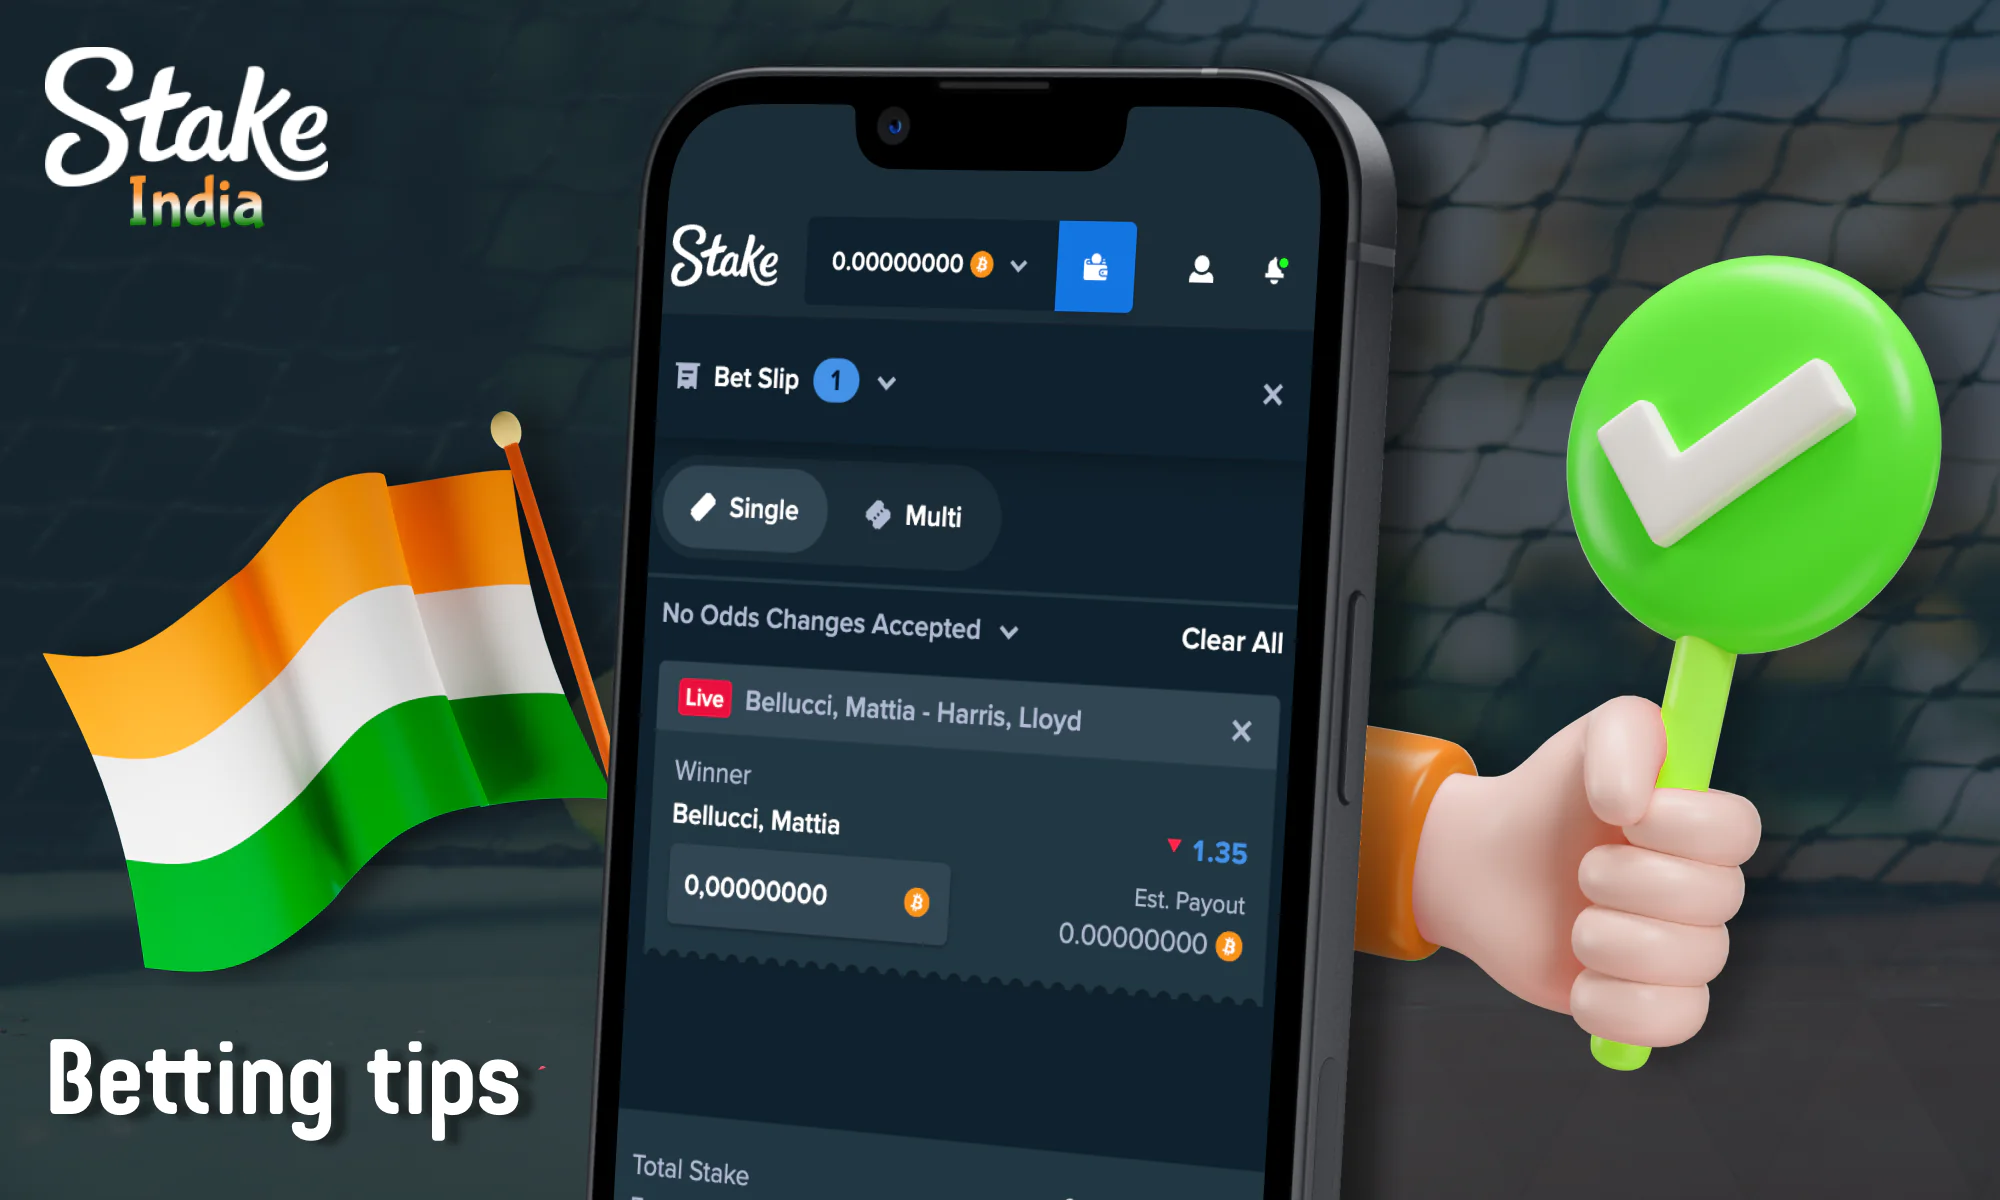 Betting tipps for bettors - Stake India